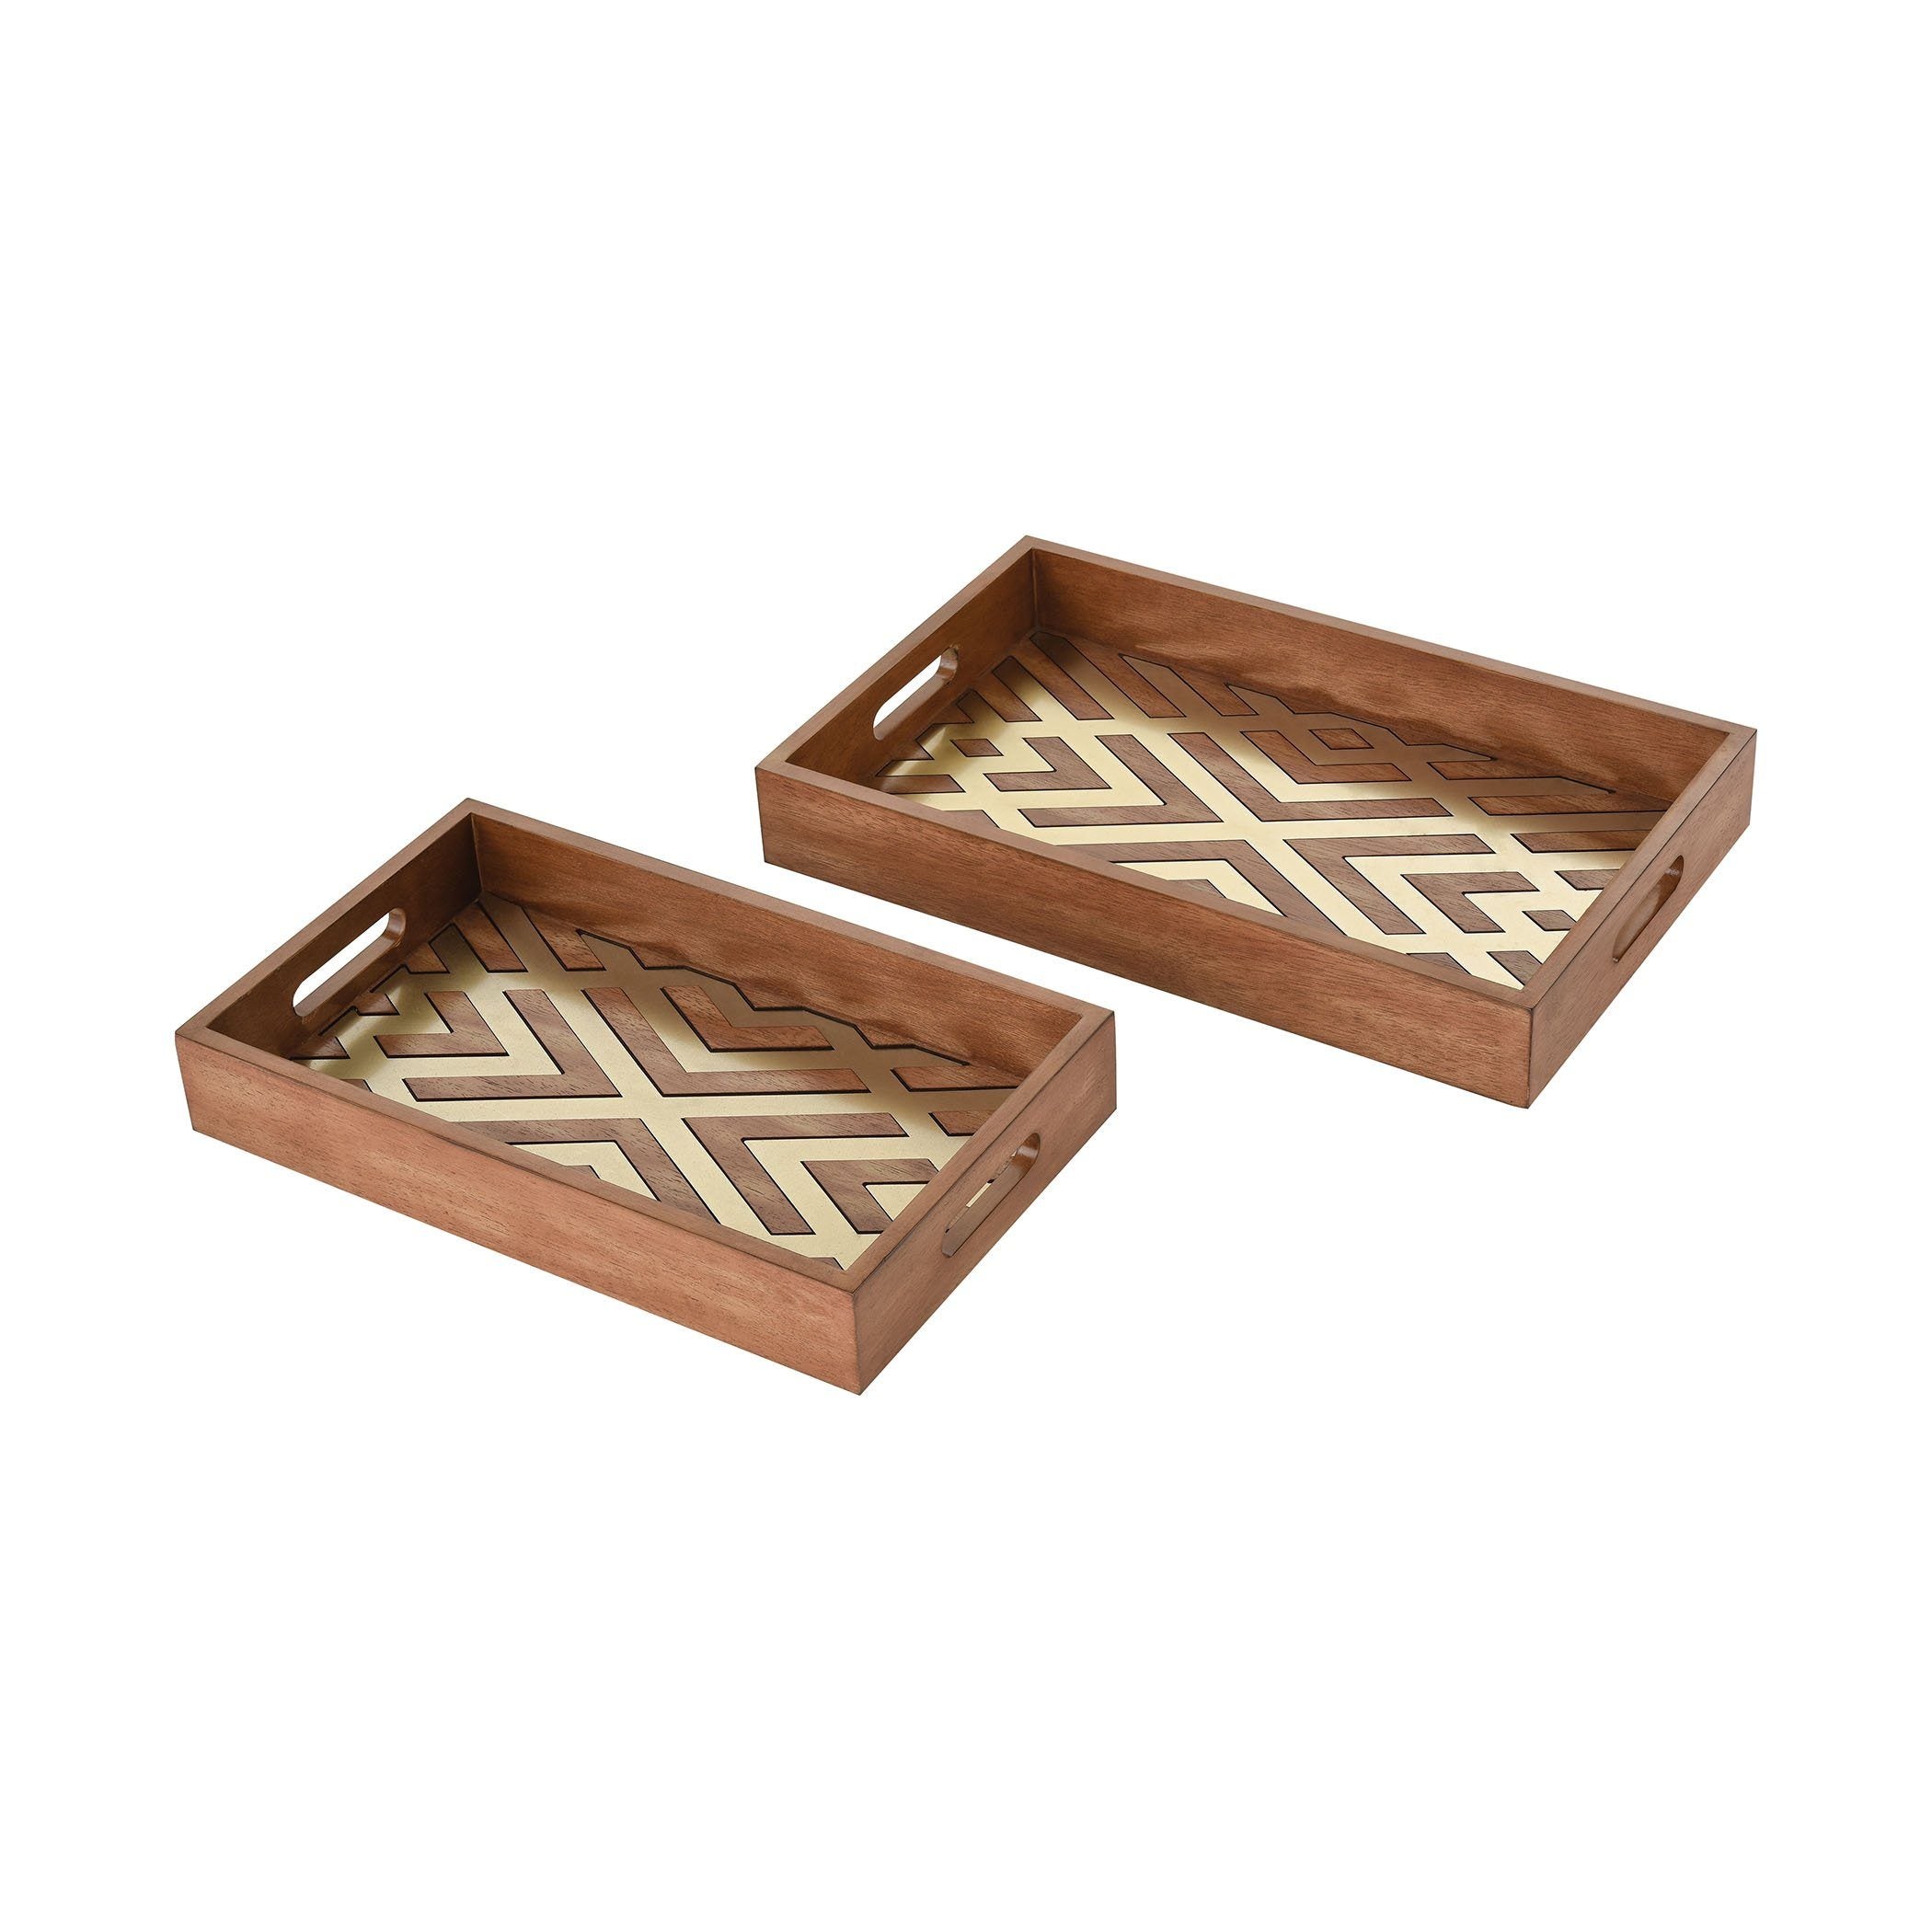 Choctaw Trays Accessories Dimond Home 